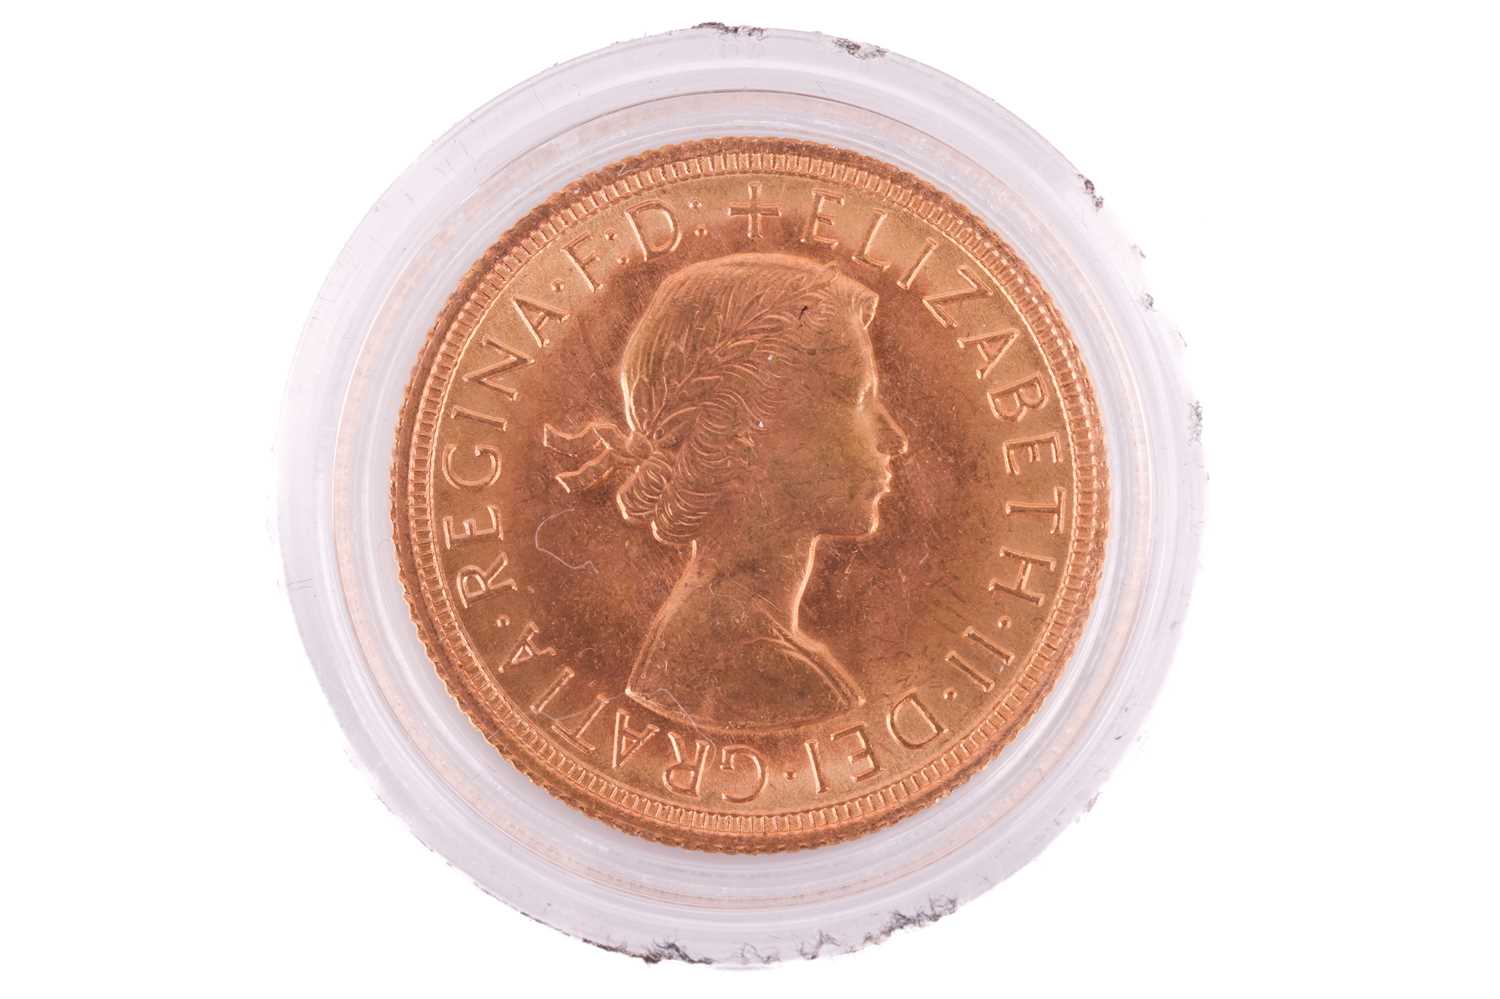 A 1966 Elizabeth II Full-Sovereign with a plastic case, circulated. - Image 2 of 2